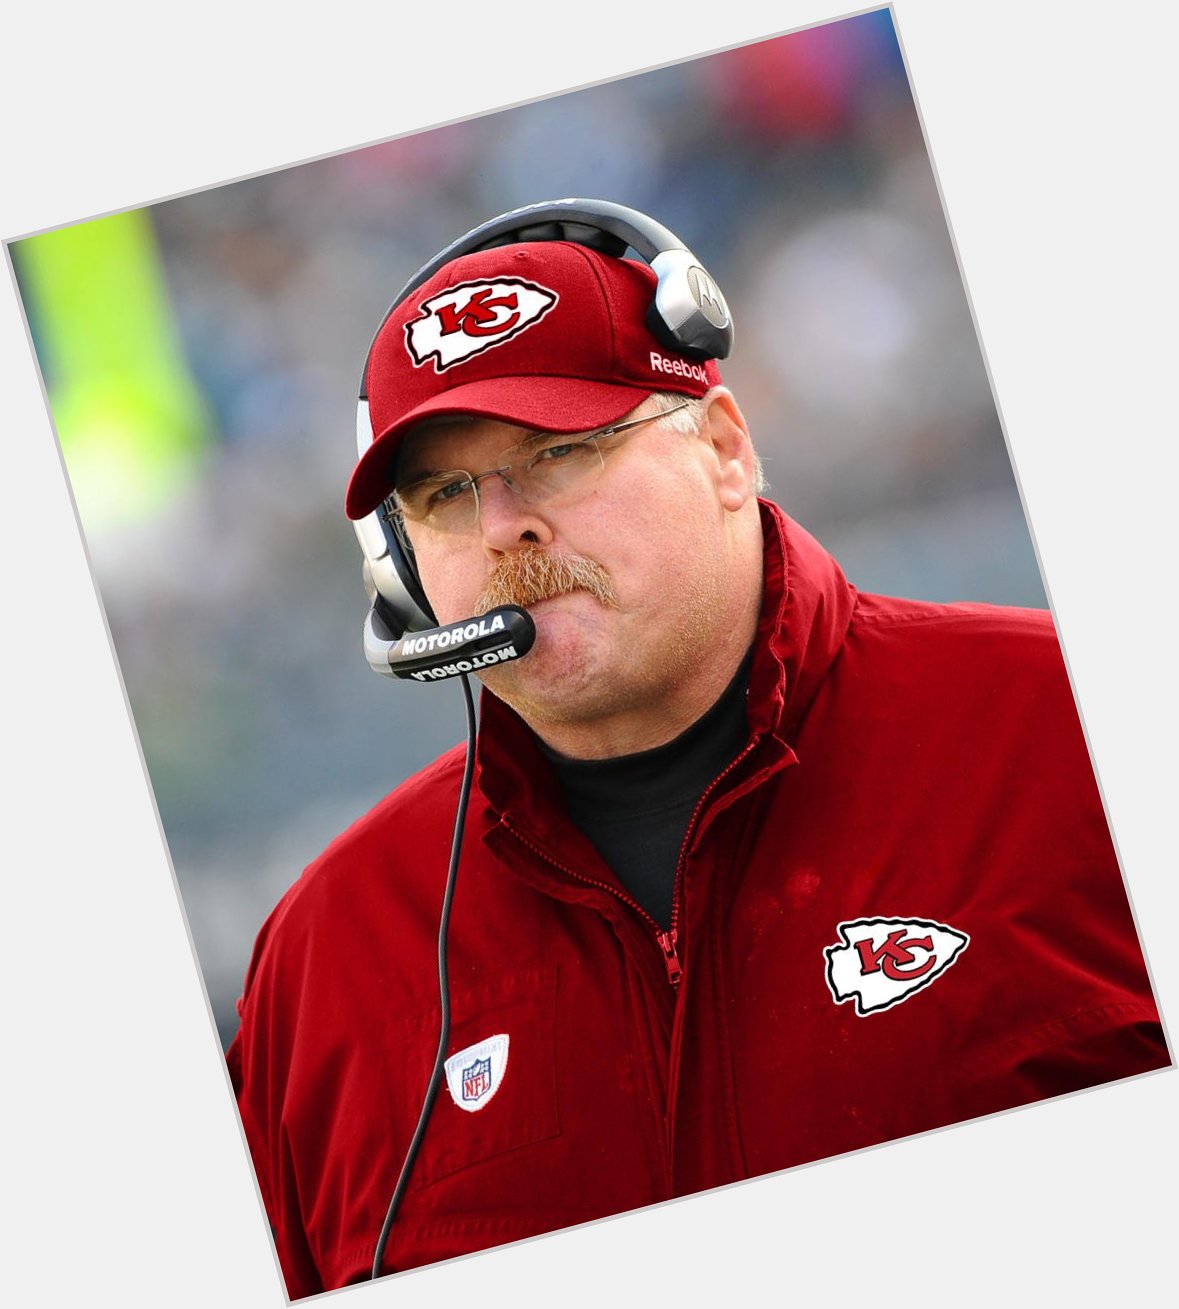 Happy Birthday to Andy Reid, who turns 59 today! 